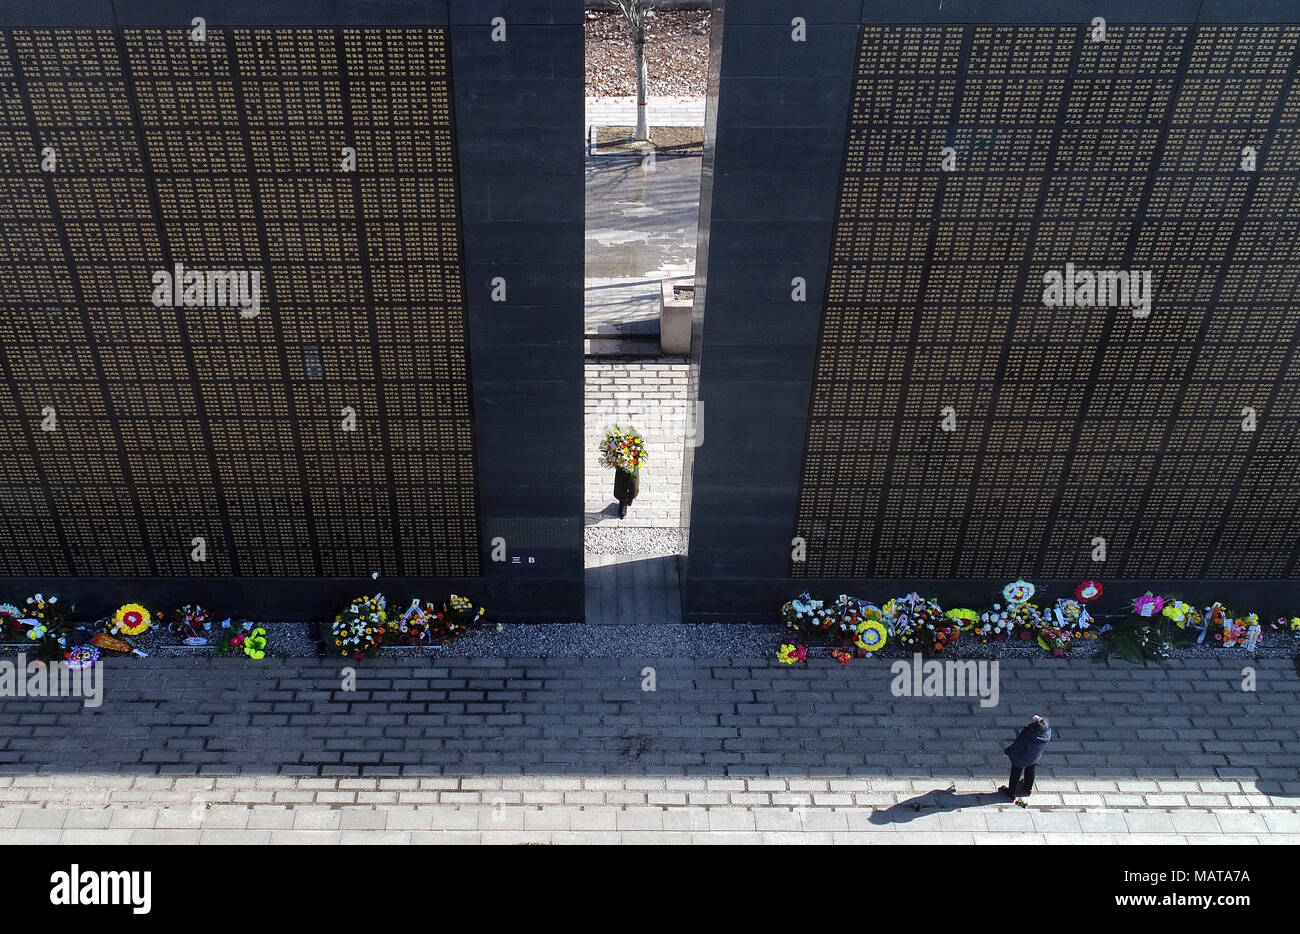 Tangshan. 4th Apr, 2018. A well-wisher visits a memorial wall in remembrance of victims in the 1976 Tangshan Earthquake in Tangshan, north China's Hebei Province, on April 4, 2018, one day before the Qingming Festival when the deceased are commemorated. Credit: Dong Jun/Xinhua/Alamy Live News Stock Photo